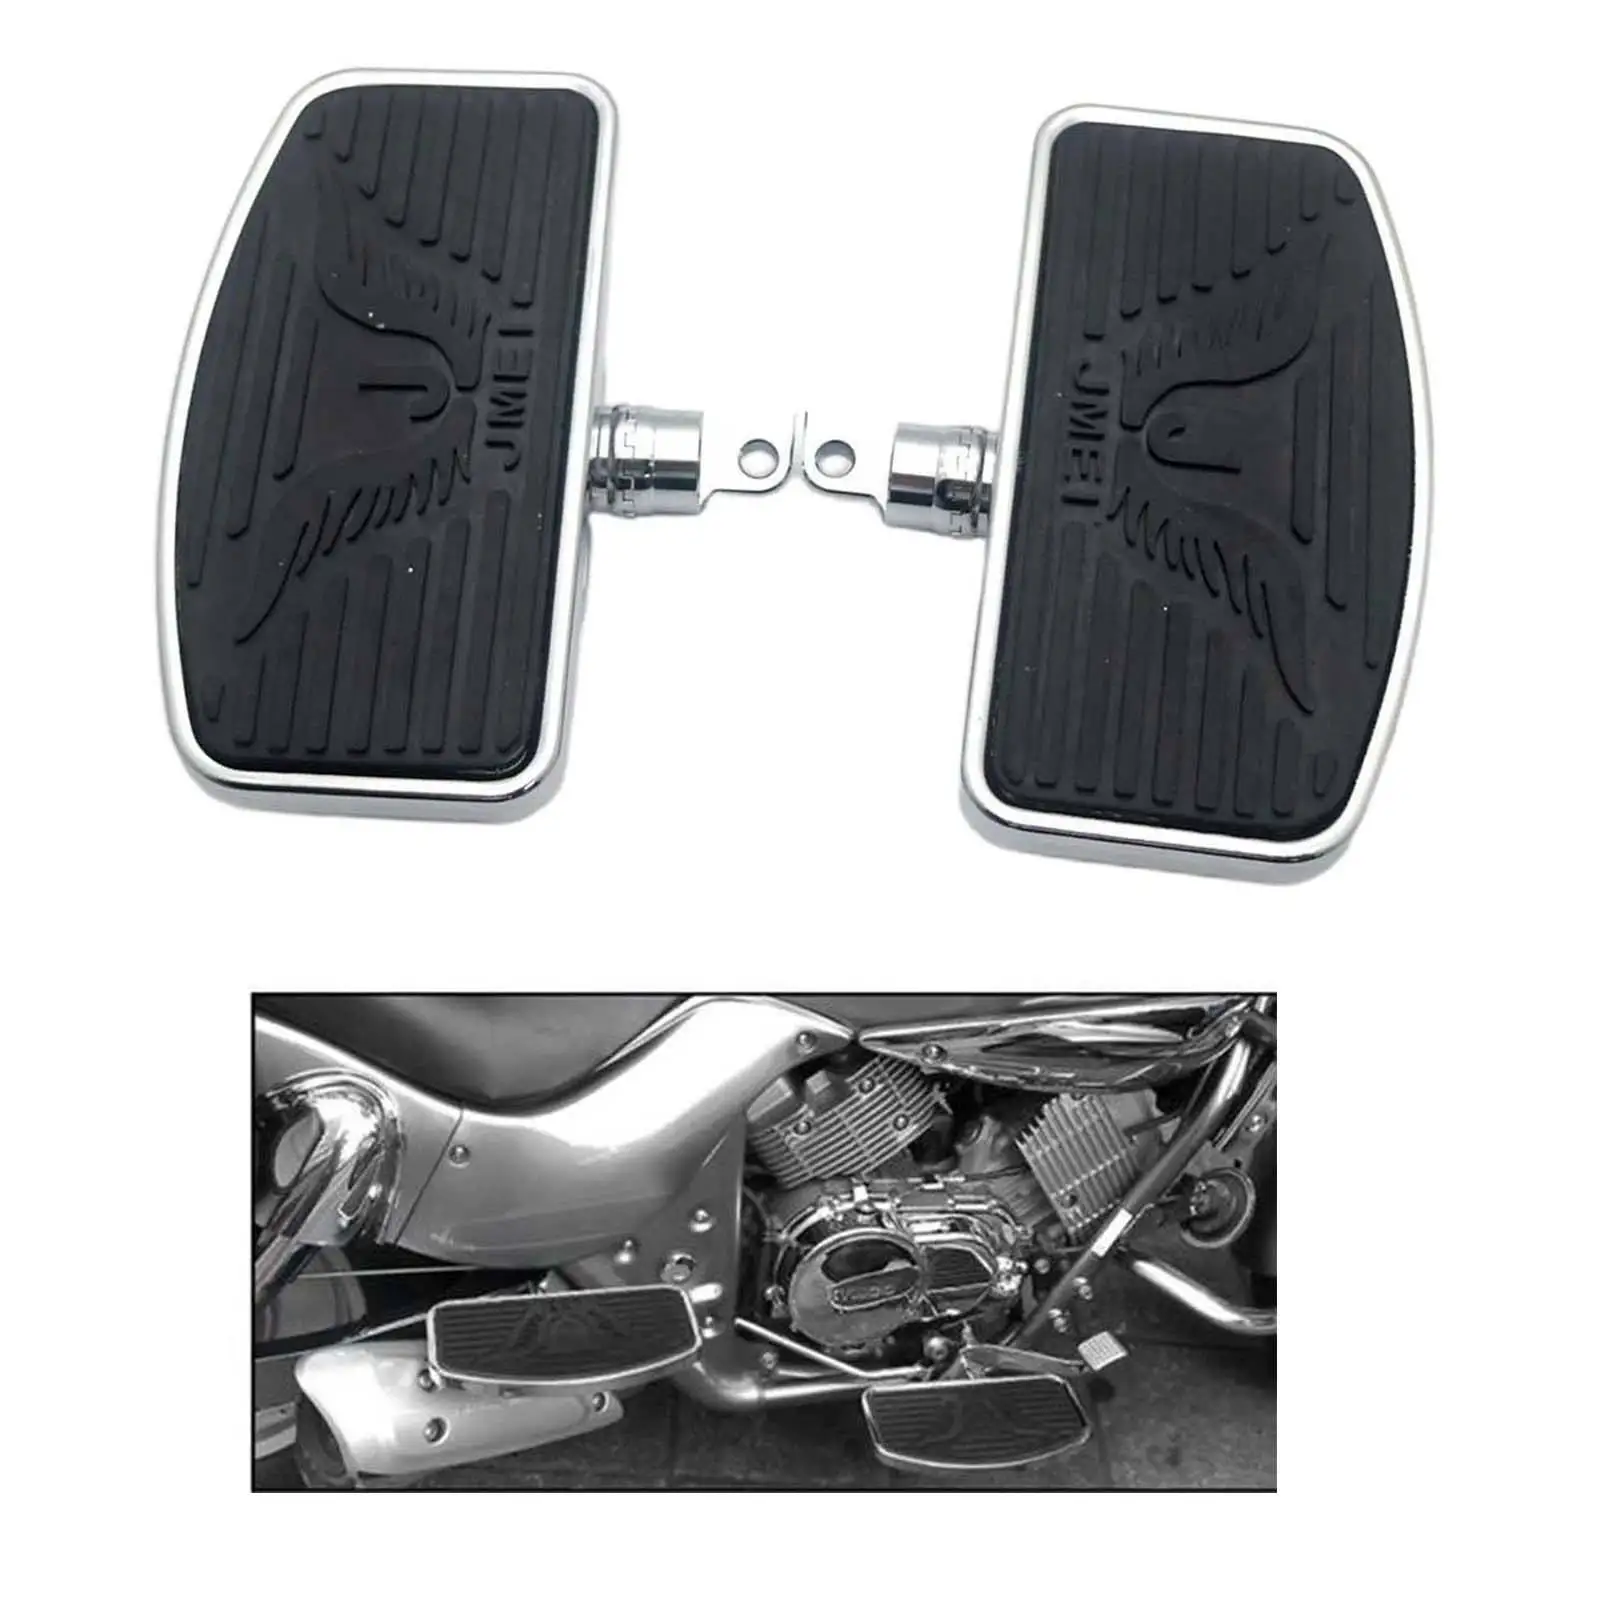 Modified Rear Passenger Footrest Pedals for Harley  883 1200